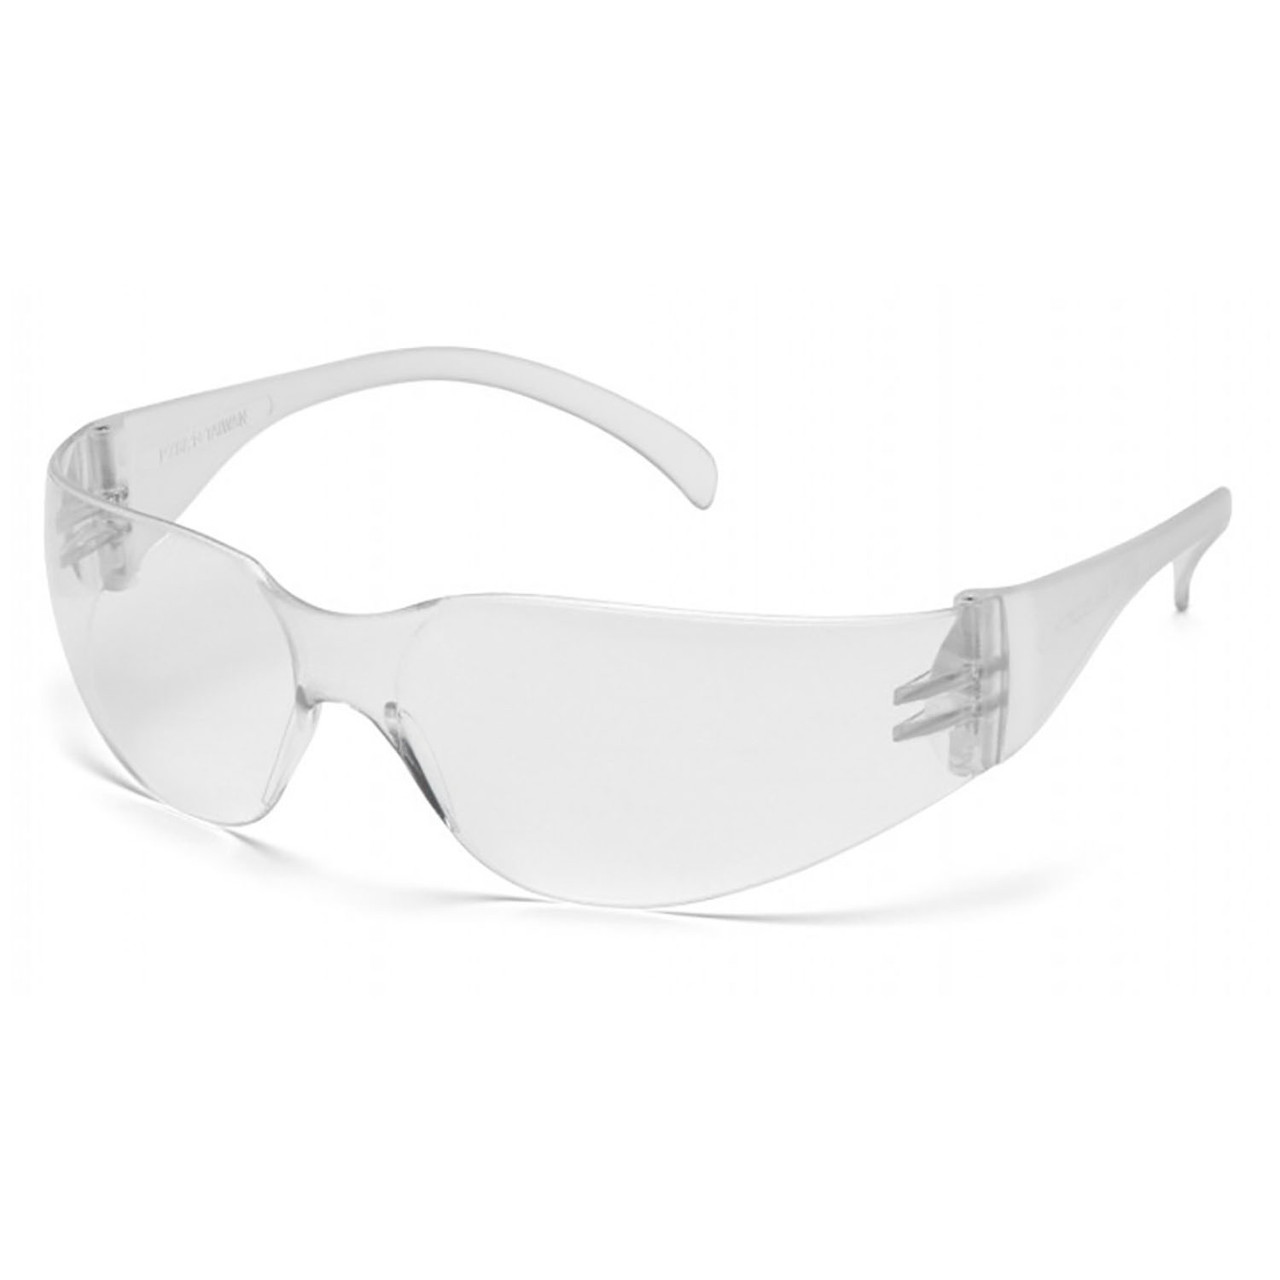 Pyramex, Intruder Series, Safety Glasses with Hardcoated Anti-fog Lens